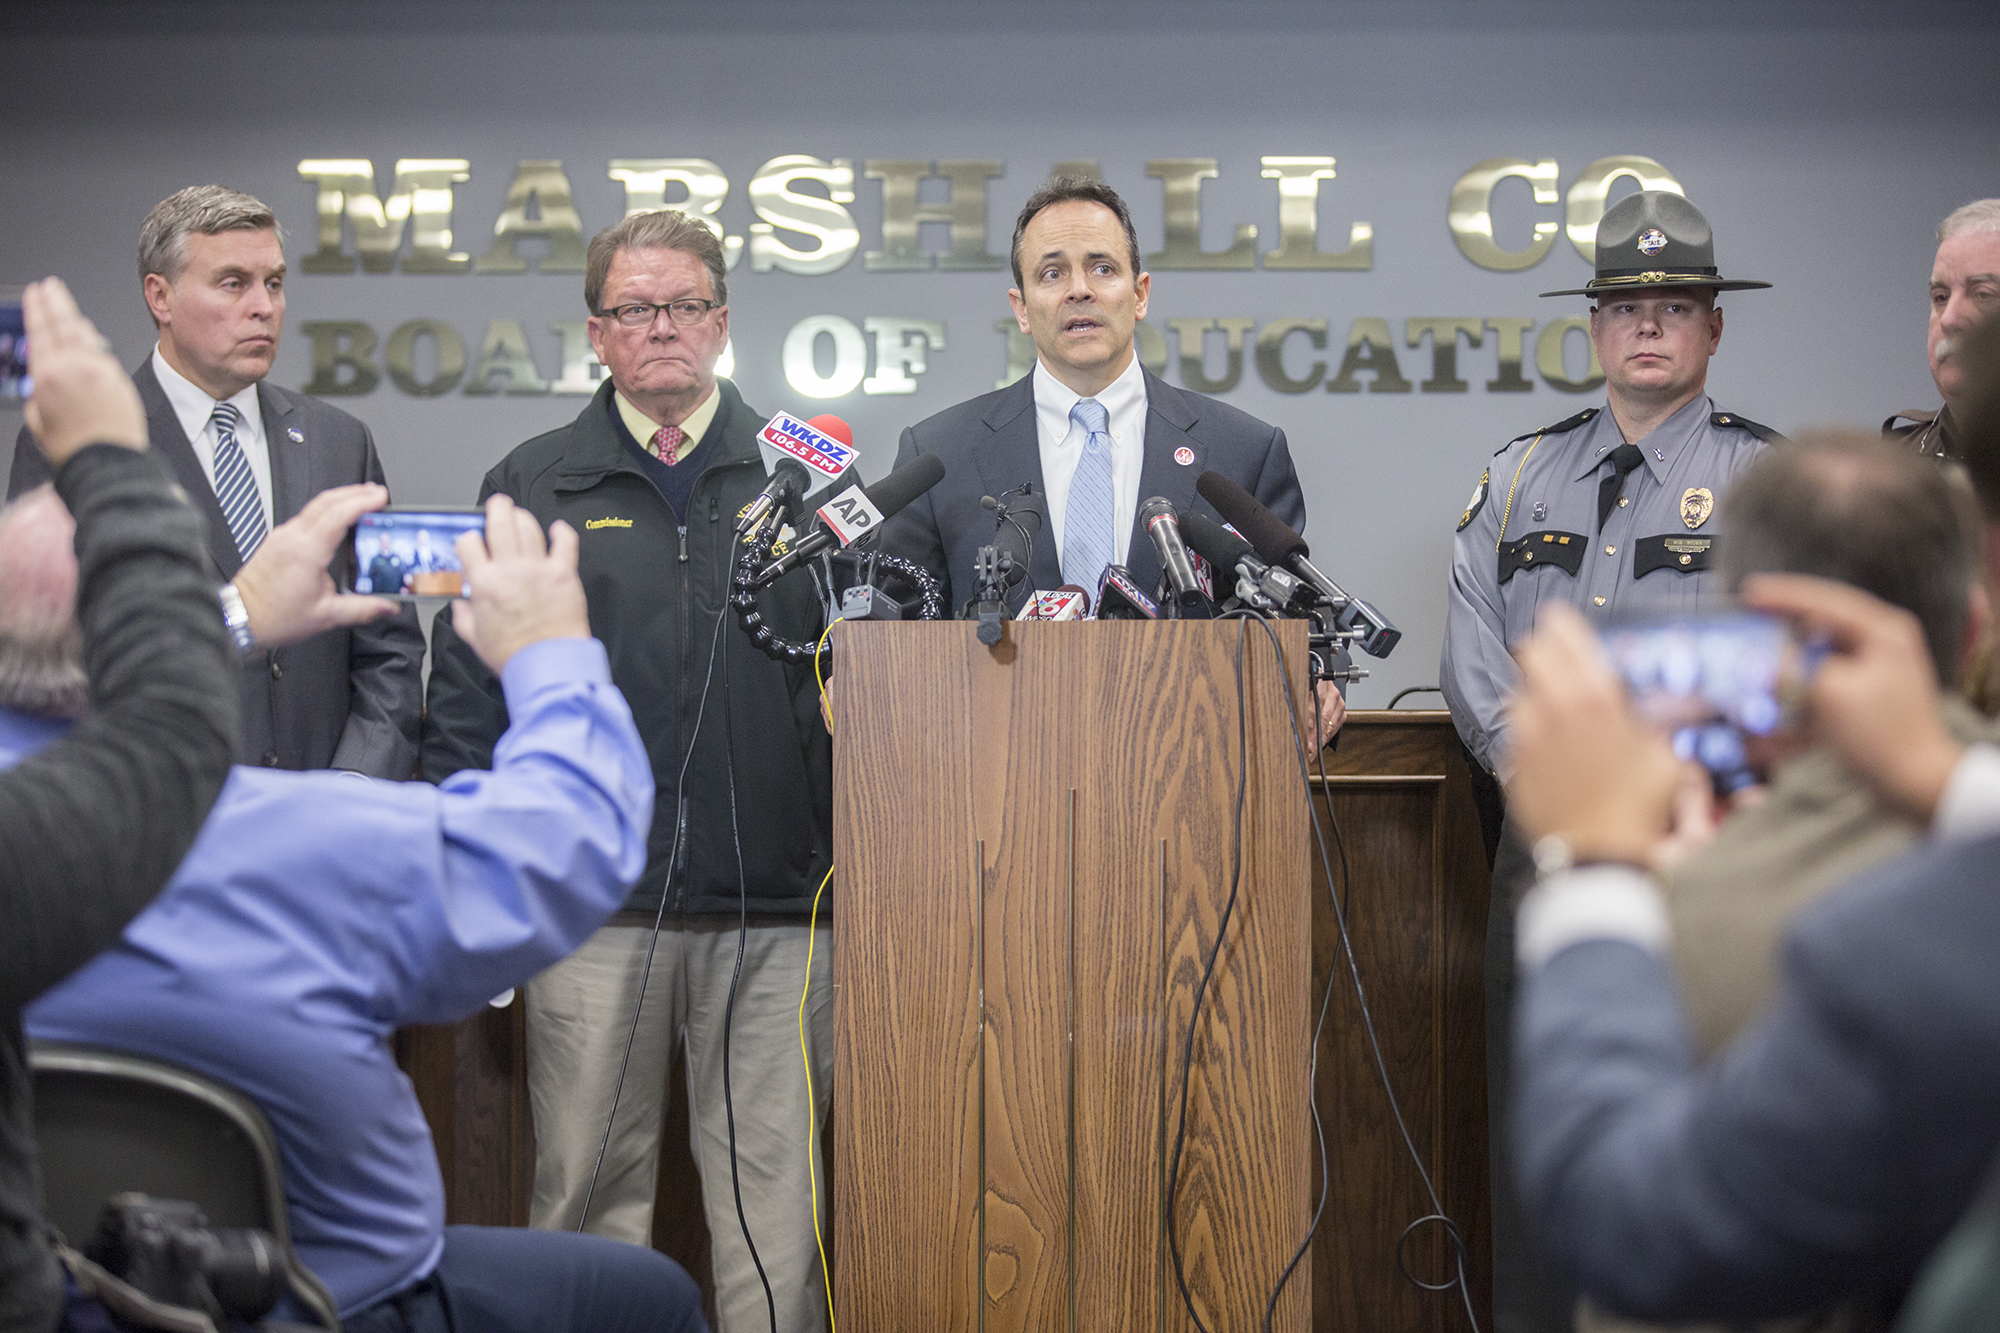 PHOTO: Gov. Matt Bevin speaks during a media briefing at the Marshall County Board of Education following a shooting at Marshall County High School in Benton, Ky., Jan. 23, 2018.